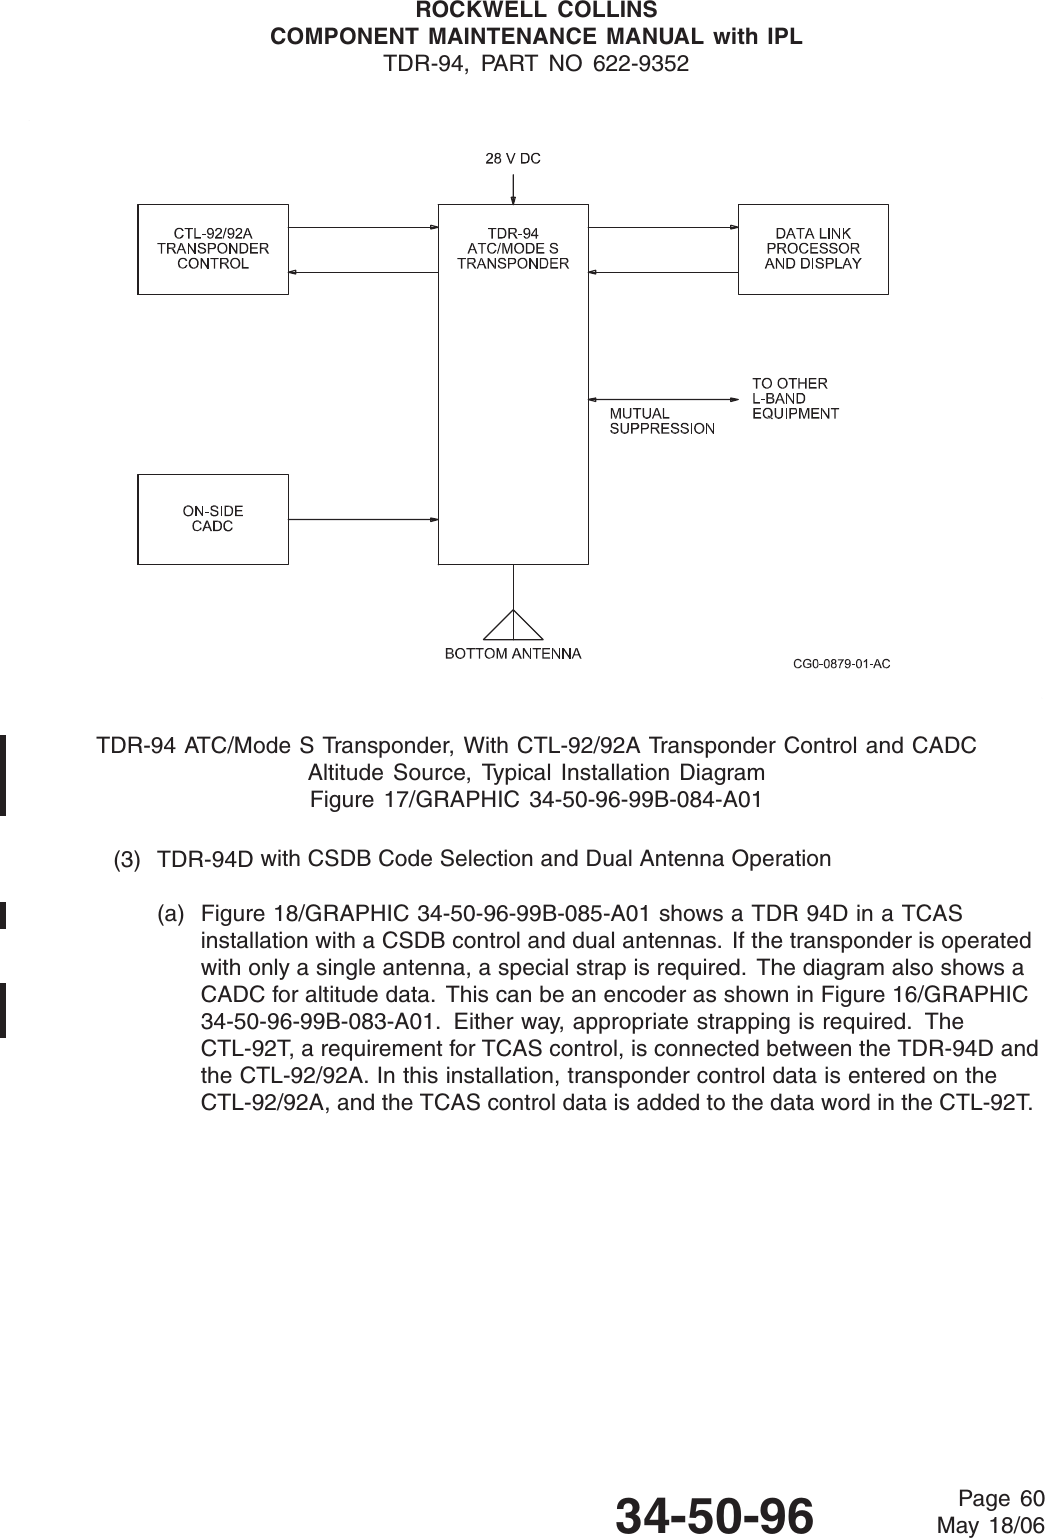 ROCKWELL COLLINSCOMPONENT MAINTENANCE MANUAL with IPLTDR-94, PART NO 622-9352TDR-94 ATC/Mode S Transponder, With CTL-92/92A Transponder Control and CADCAltitude Source, Typical Installation DiagramFigure 17/GRAPHIC 34-50-96-99B-084-A01(3) TDR-94D with CSDB Code Selection and Dual Antenna Operation(a) Figure 18/GRAPHIC 34-50-96-99B-085-A01 shows a TDR 94D in a TCASinstallation with a CSDB control and dual antennas. If the transponder is operatedwith only a single antenna, a special strap is required. The diagram also shows aCADC for altitude data. This can be an encoder as shown in Figure 16/GRAPHIC34-50-96-99B-083-A01. Either way, appropriate strapping is required. TheCTL-92T, a requirement for TCAS control, is connected between the TDR-94D andthe CTL-92/92A. In this installation, transponder control data is entered on theCTL-92/92A, and the TCAS control data is added to the data word in the CTL-92T.34-50-96 Page 60May 18/06